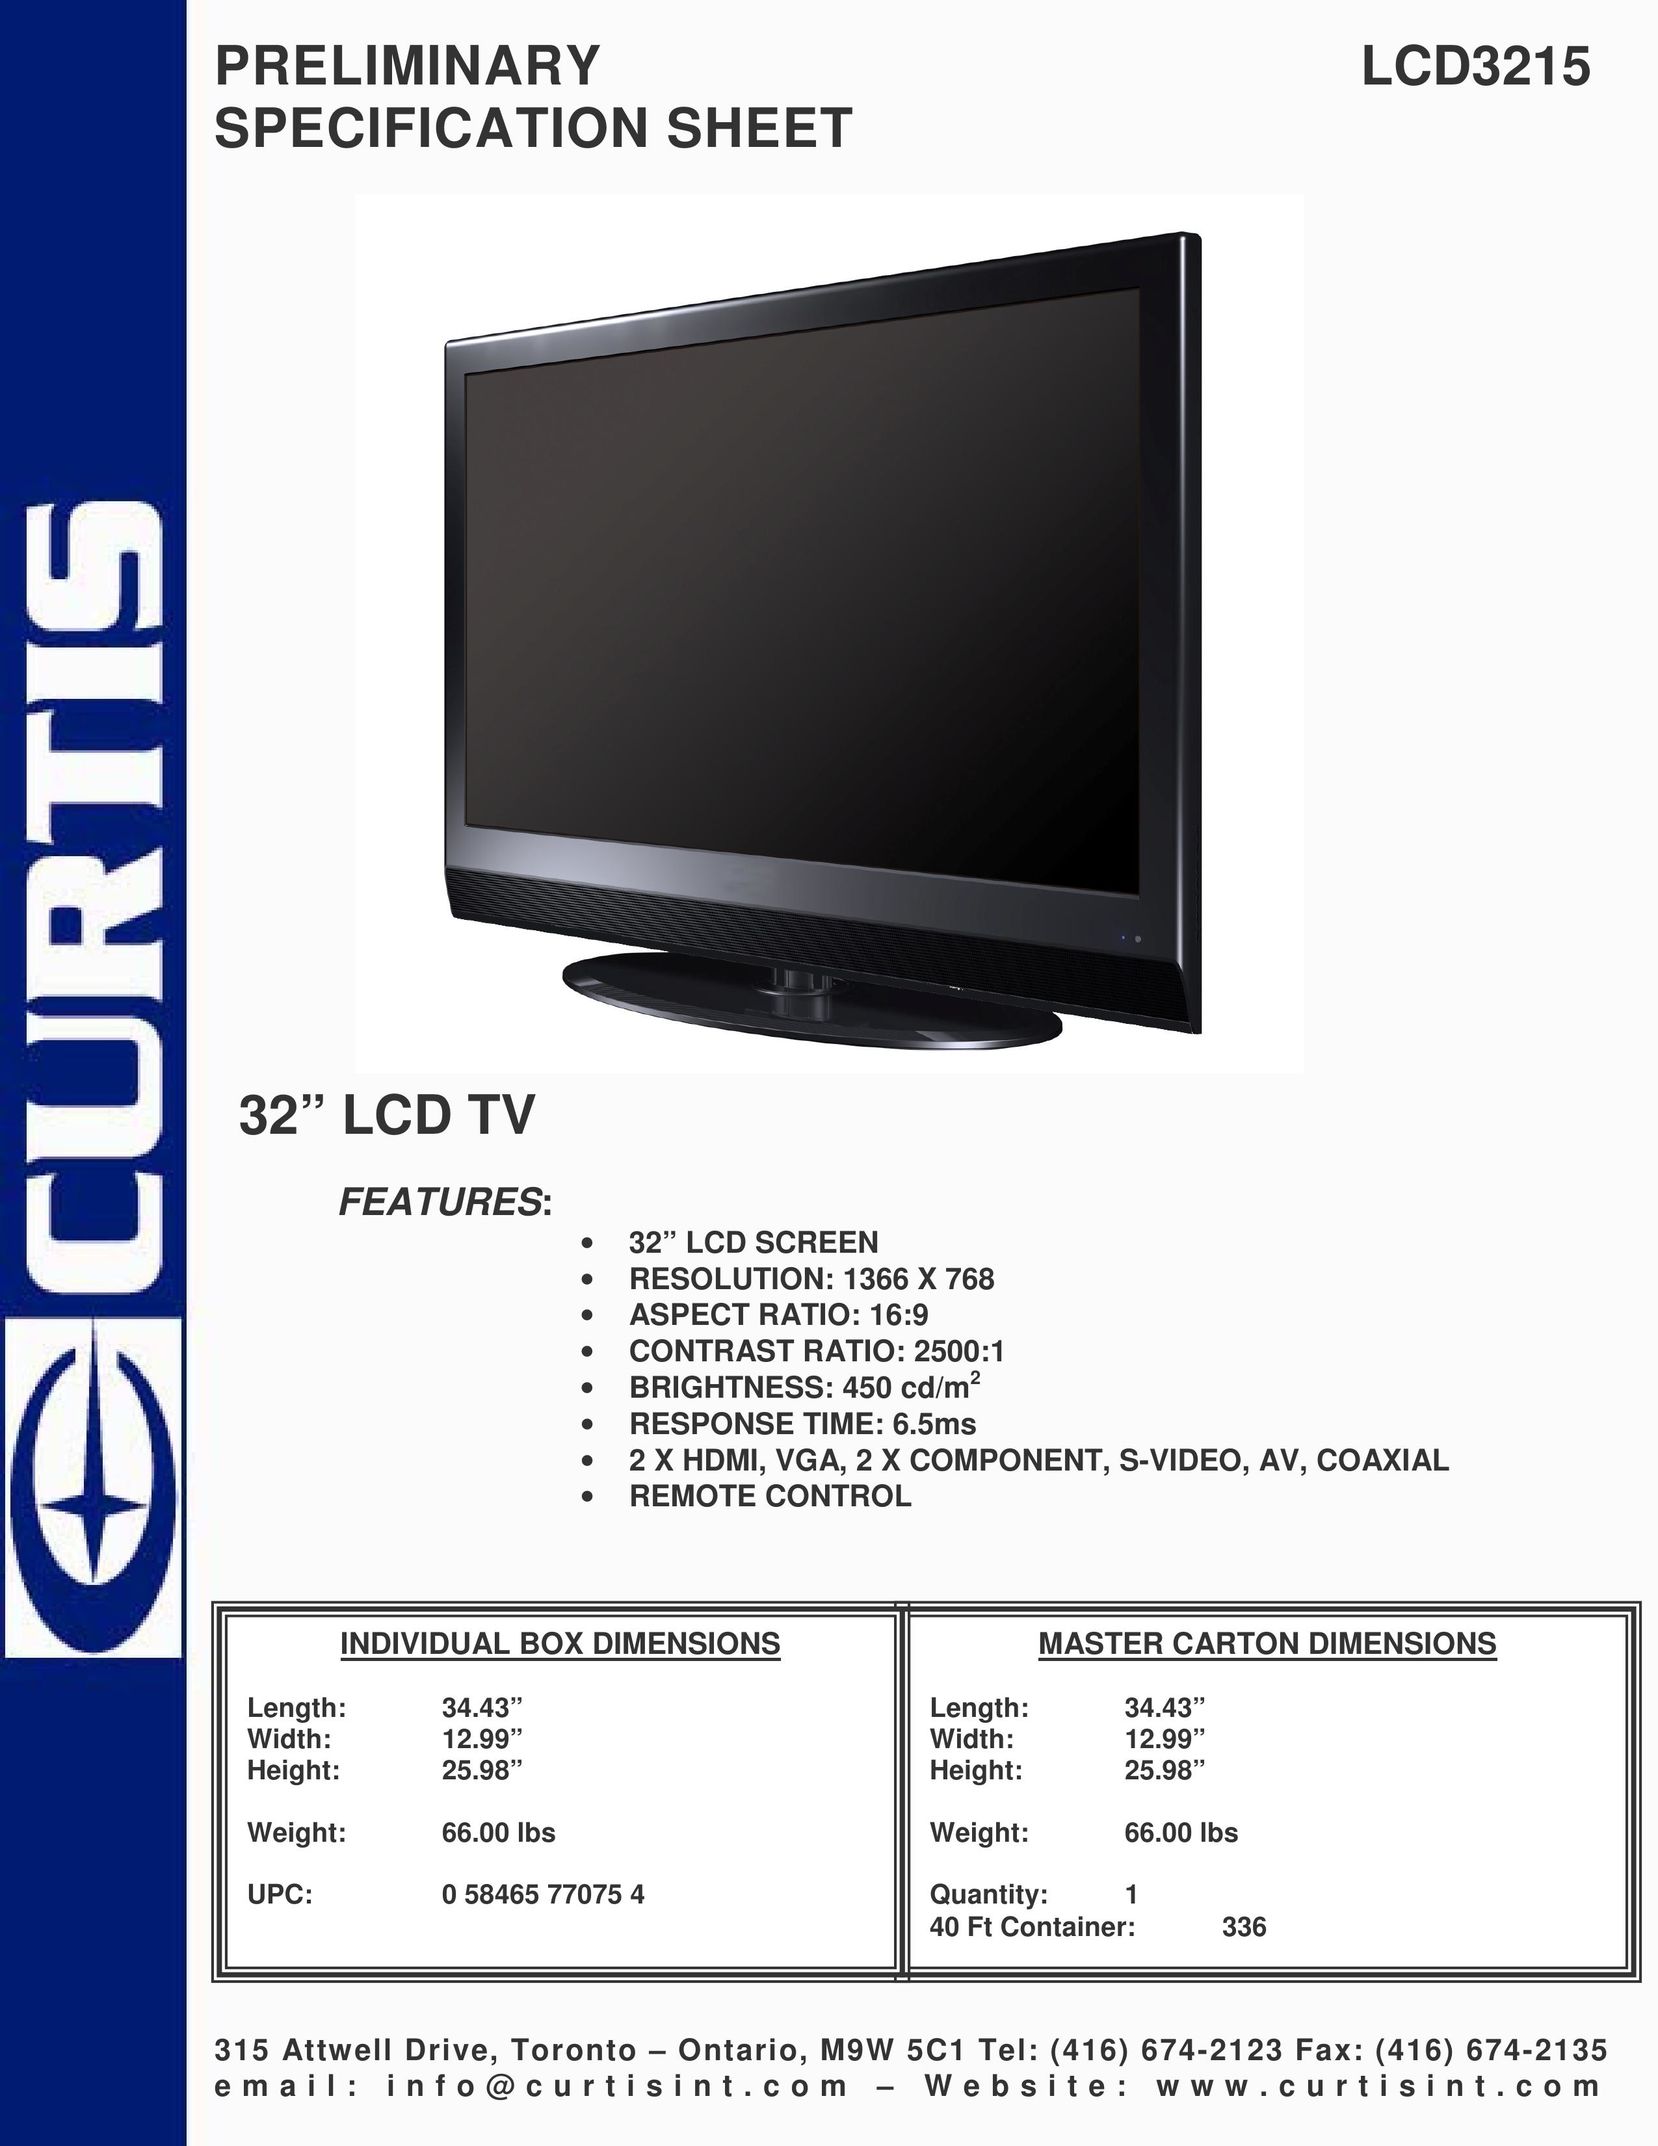 Curtis LCD3215 Flat Panel Television User Manual